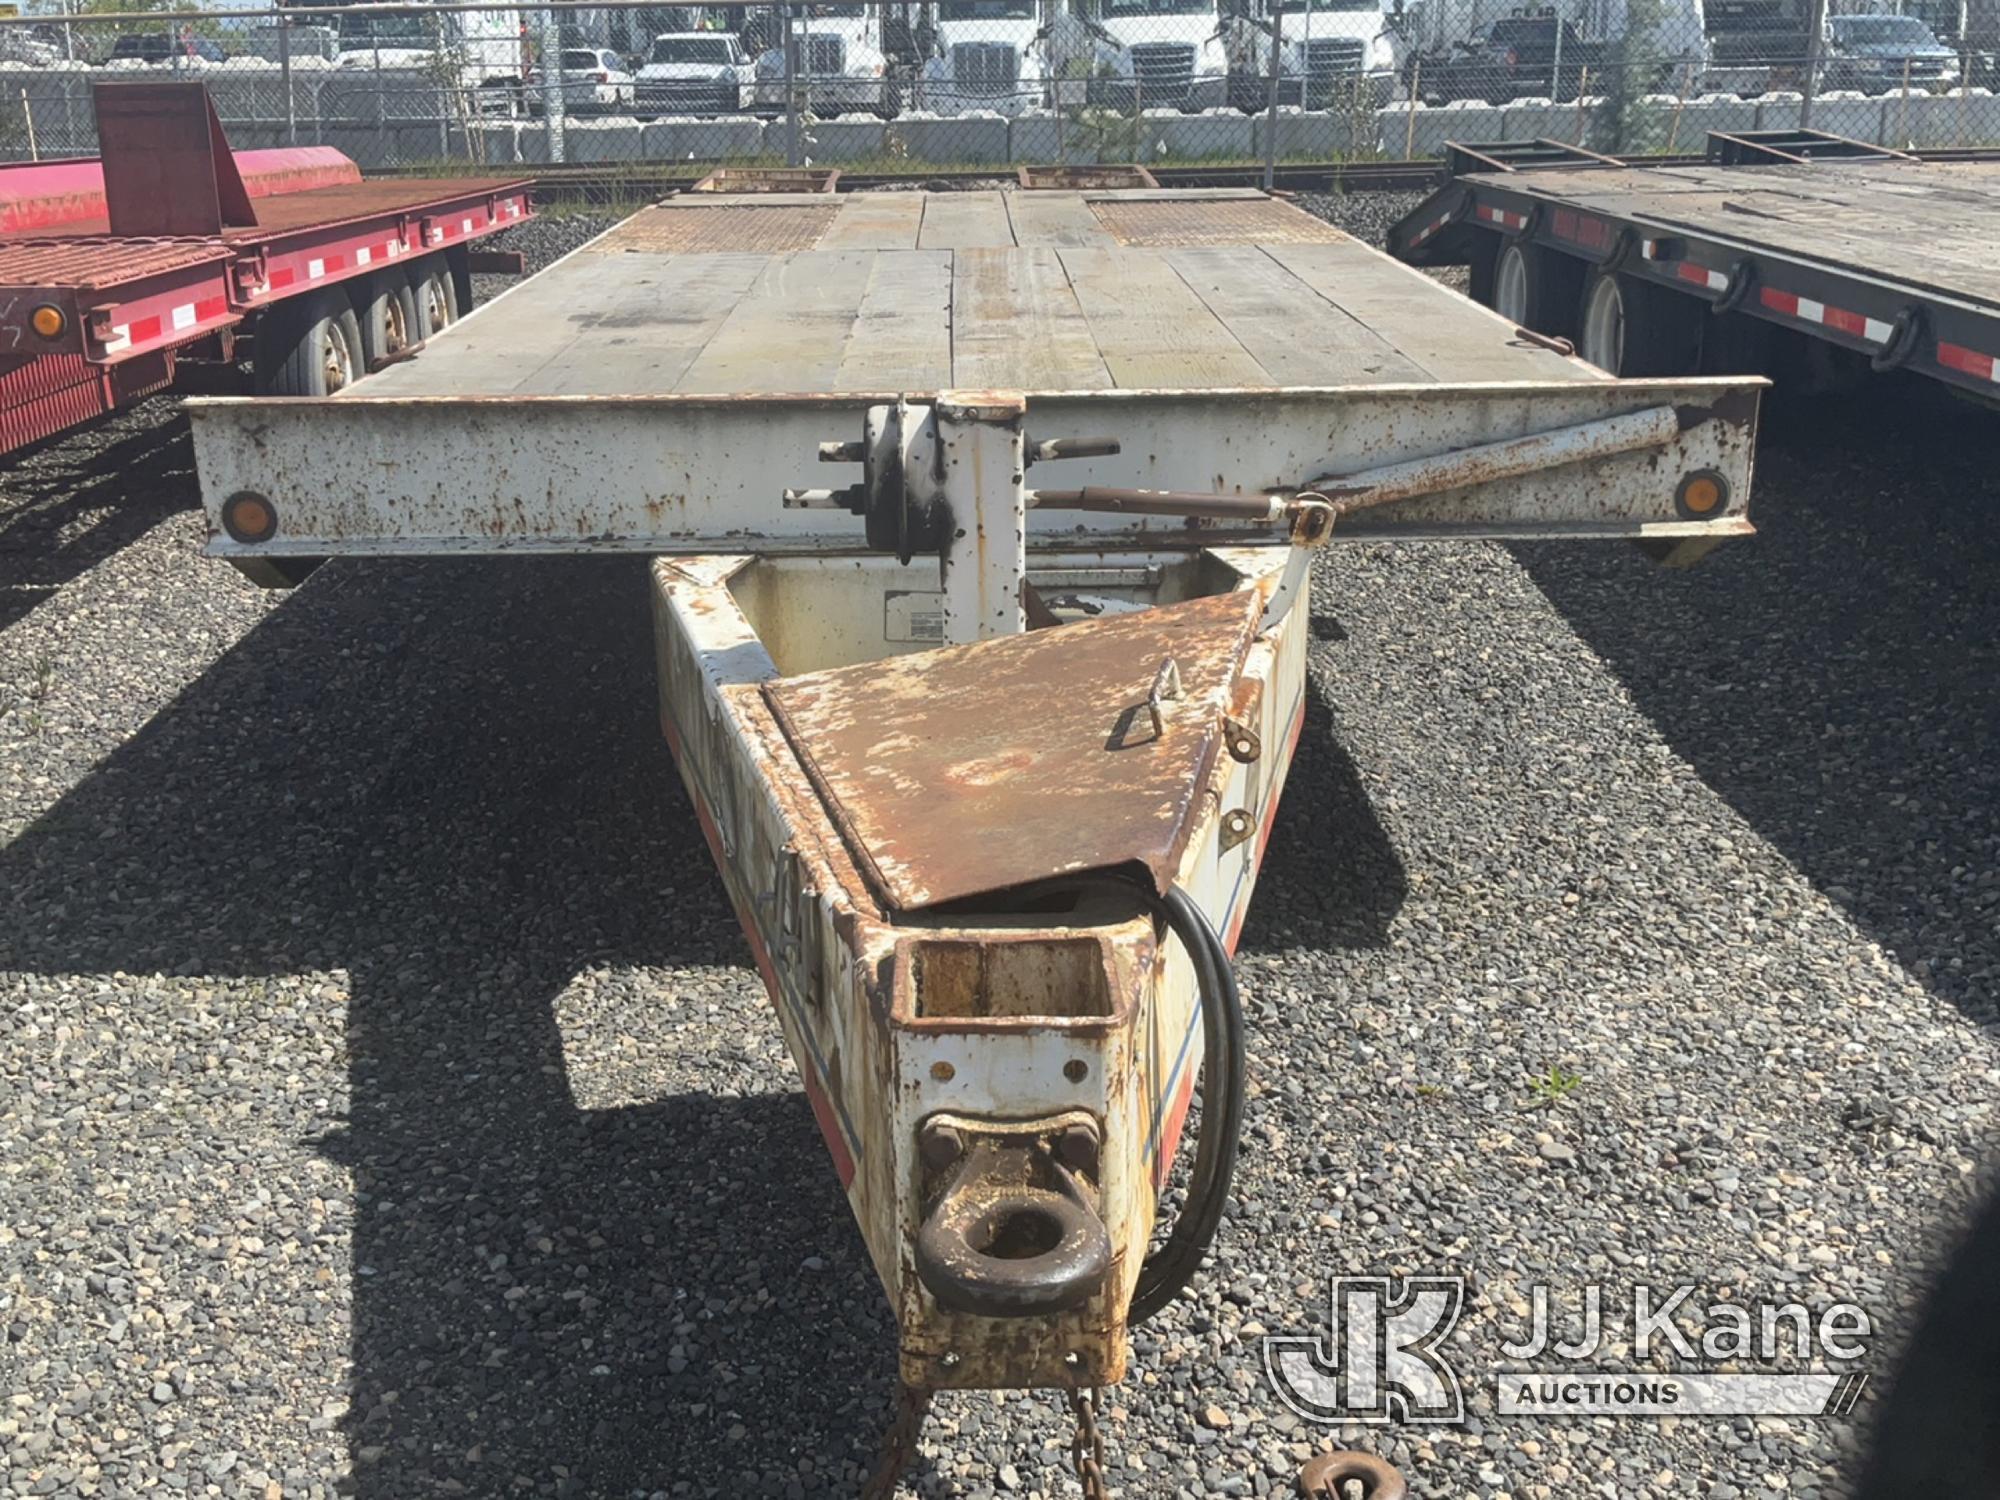 (Portland, OR) 2002 Trailermax TD 40 FBR T/A Tagalong Equipment Trailer Towable